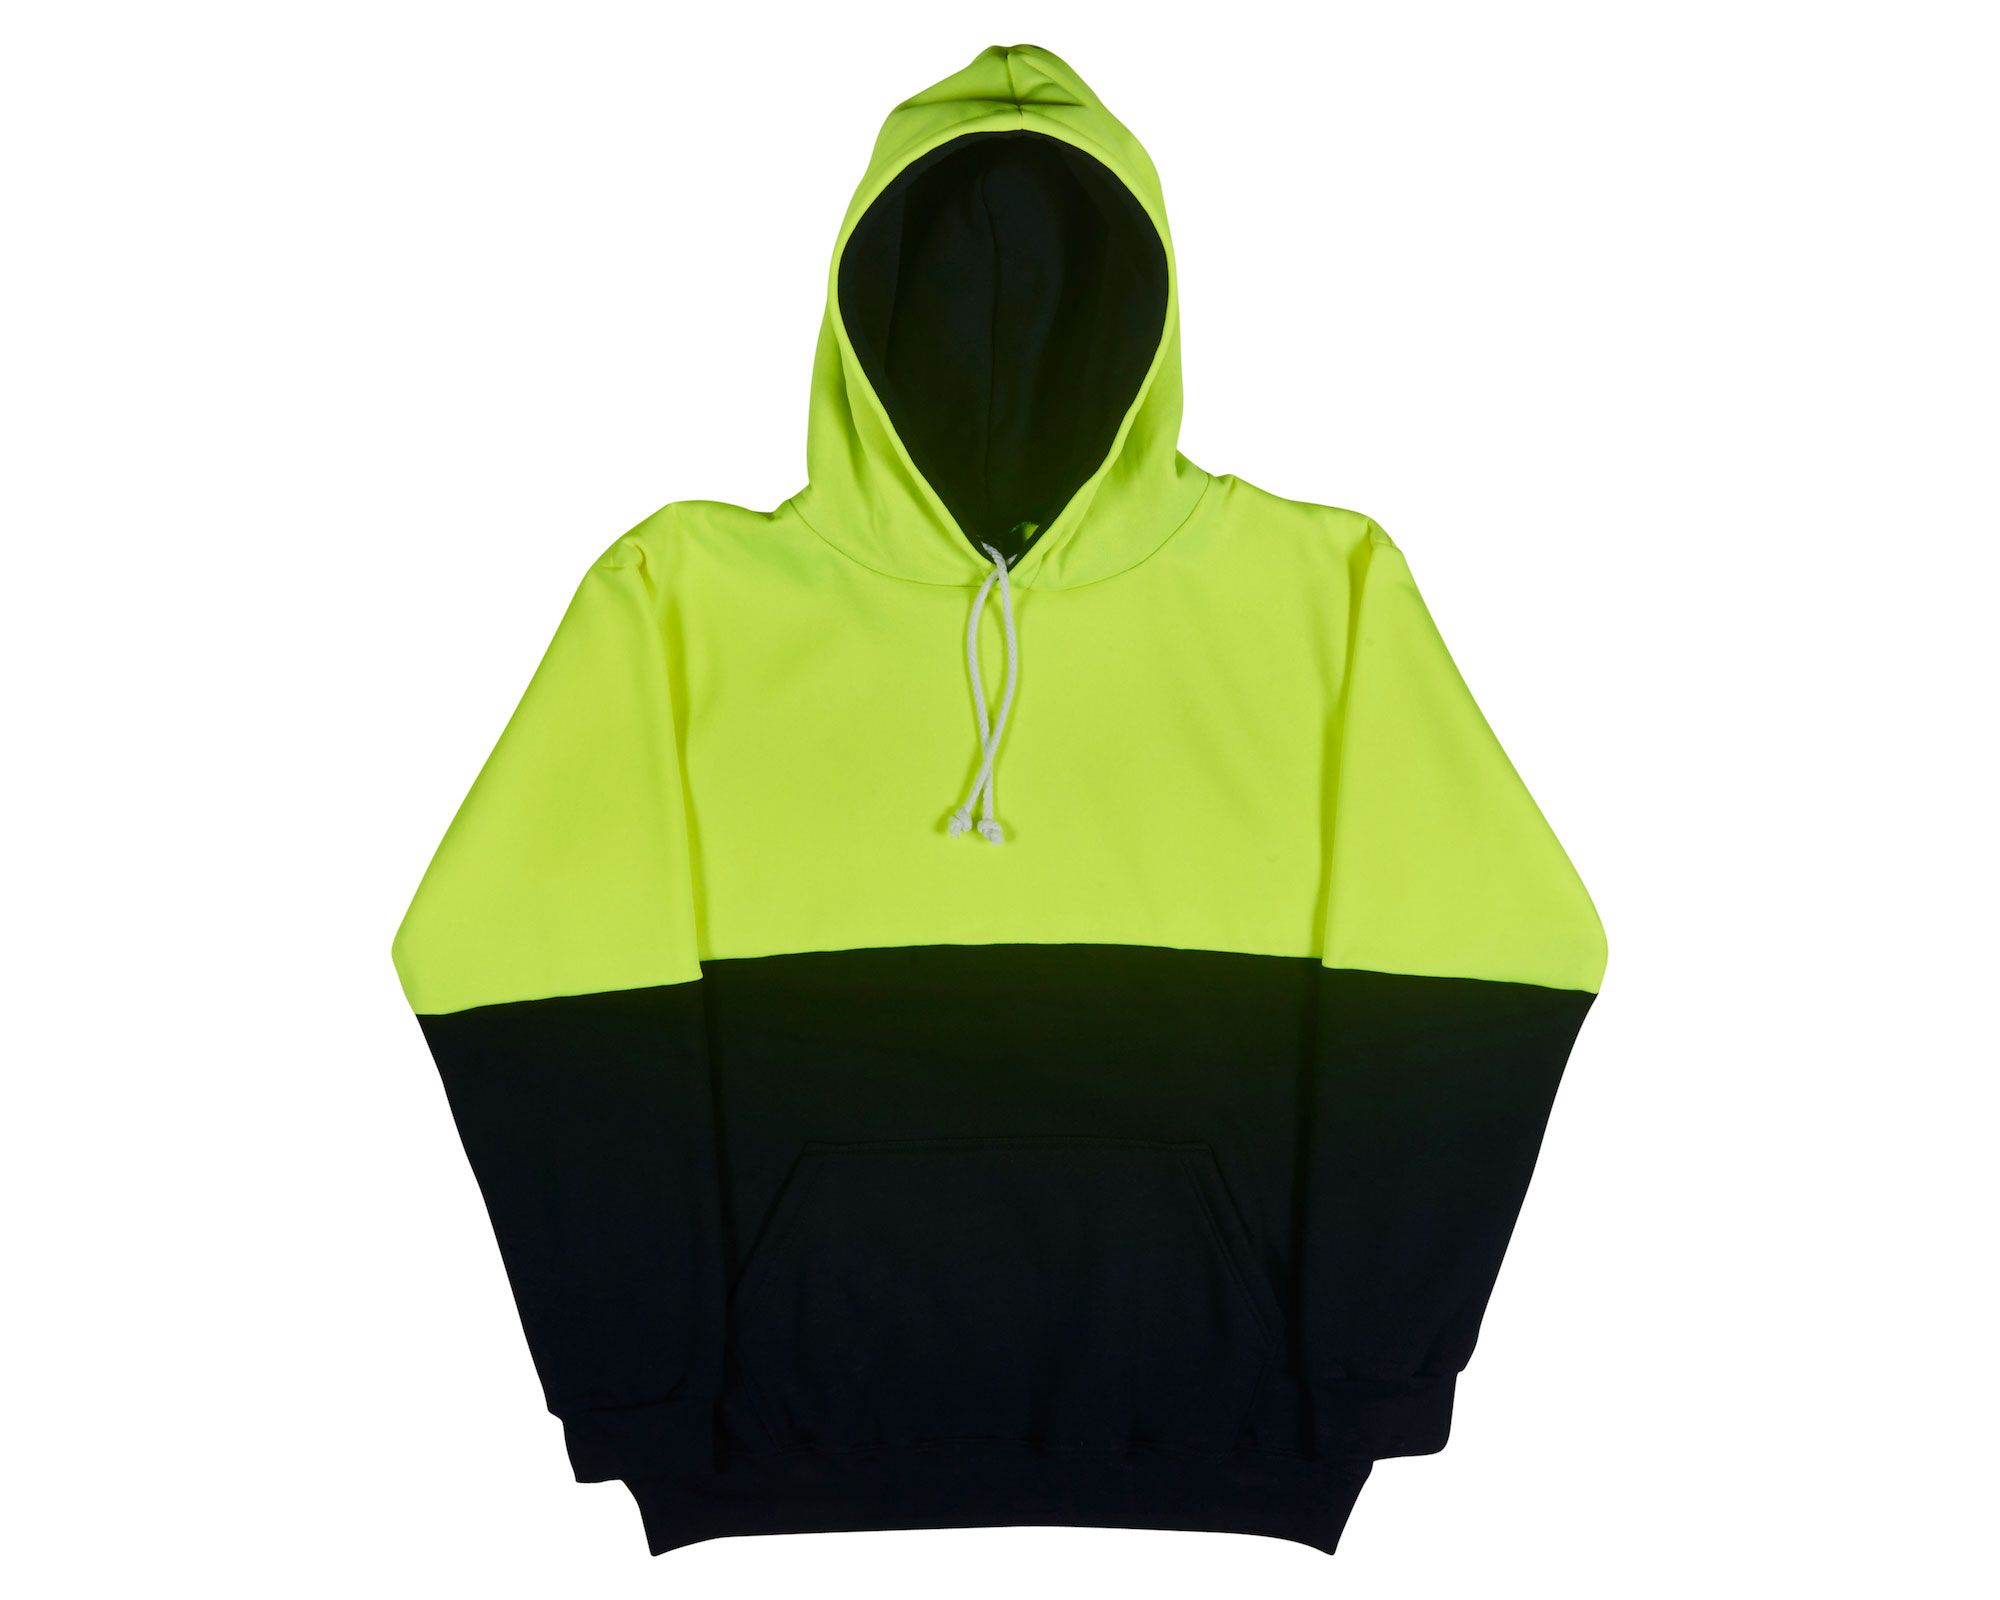 shelikes Mens no Zip 2 Tone Hi Vis Visibility Sweatshirt Tape Band Pull Over Security Crew Neck 